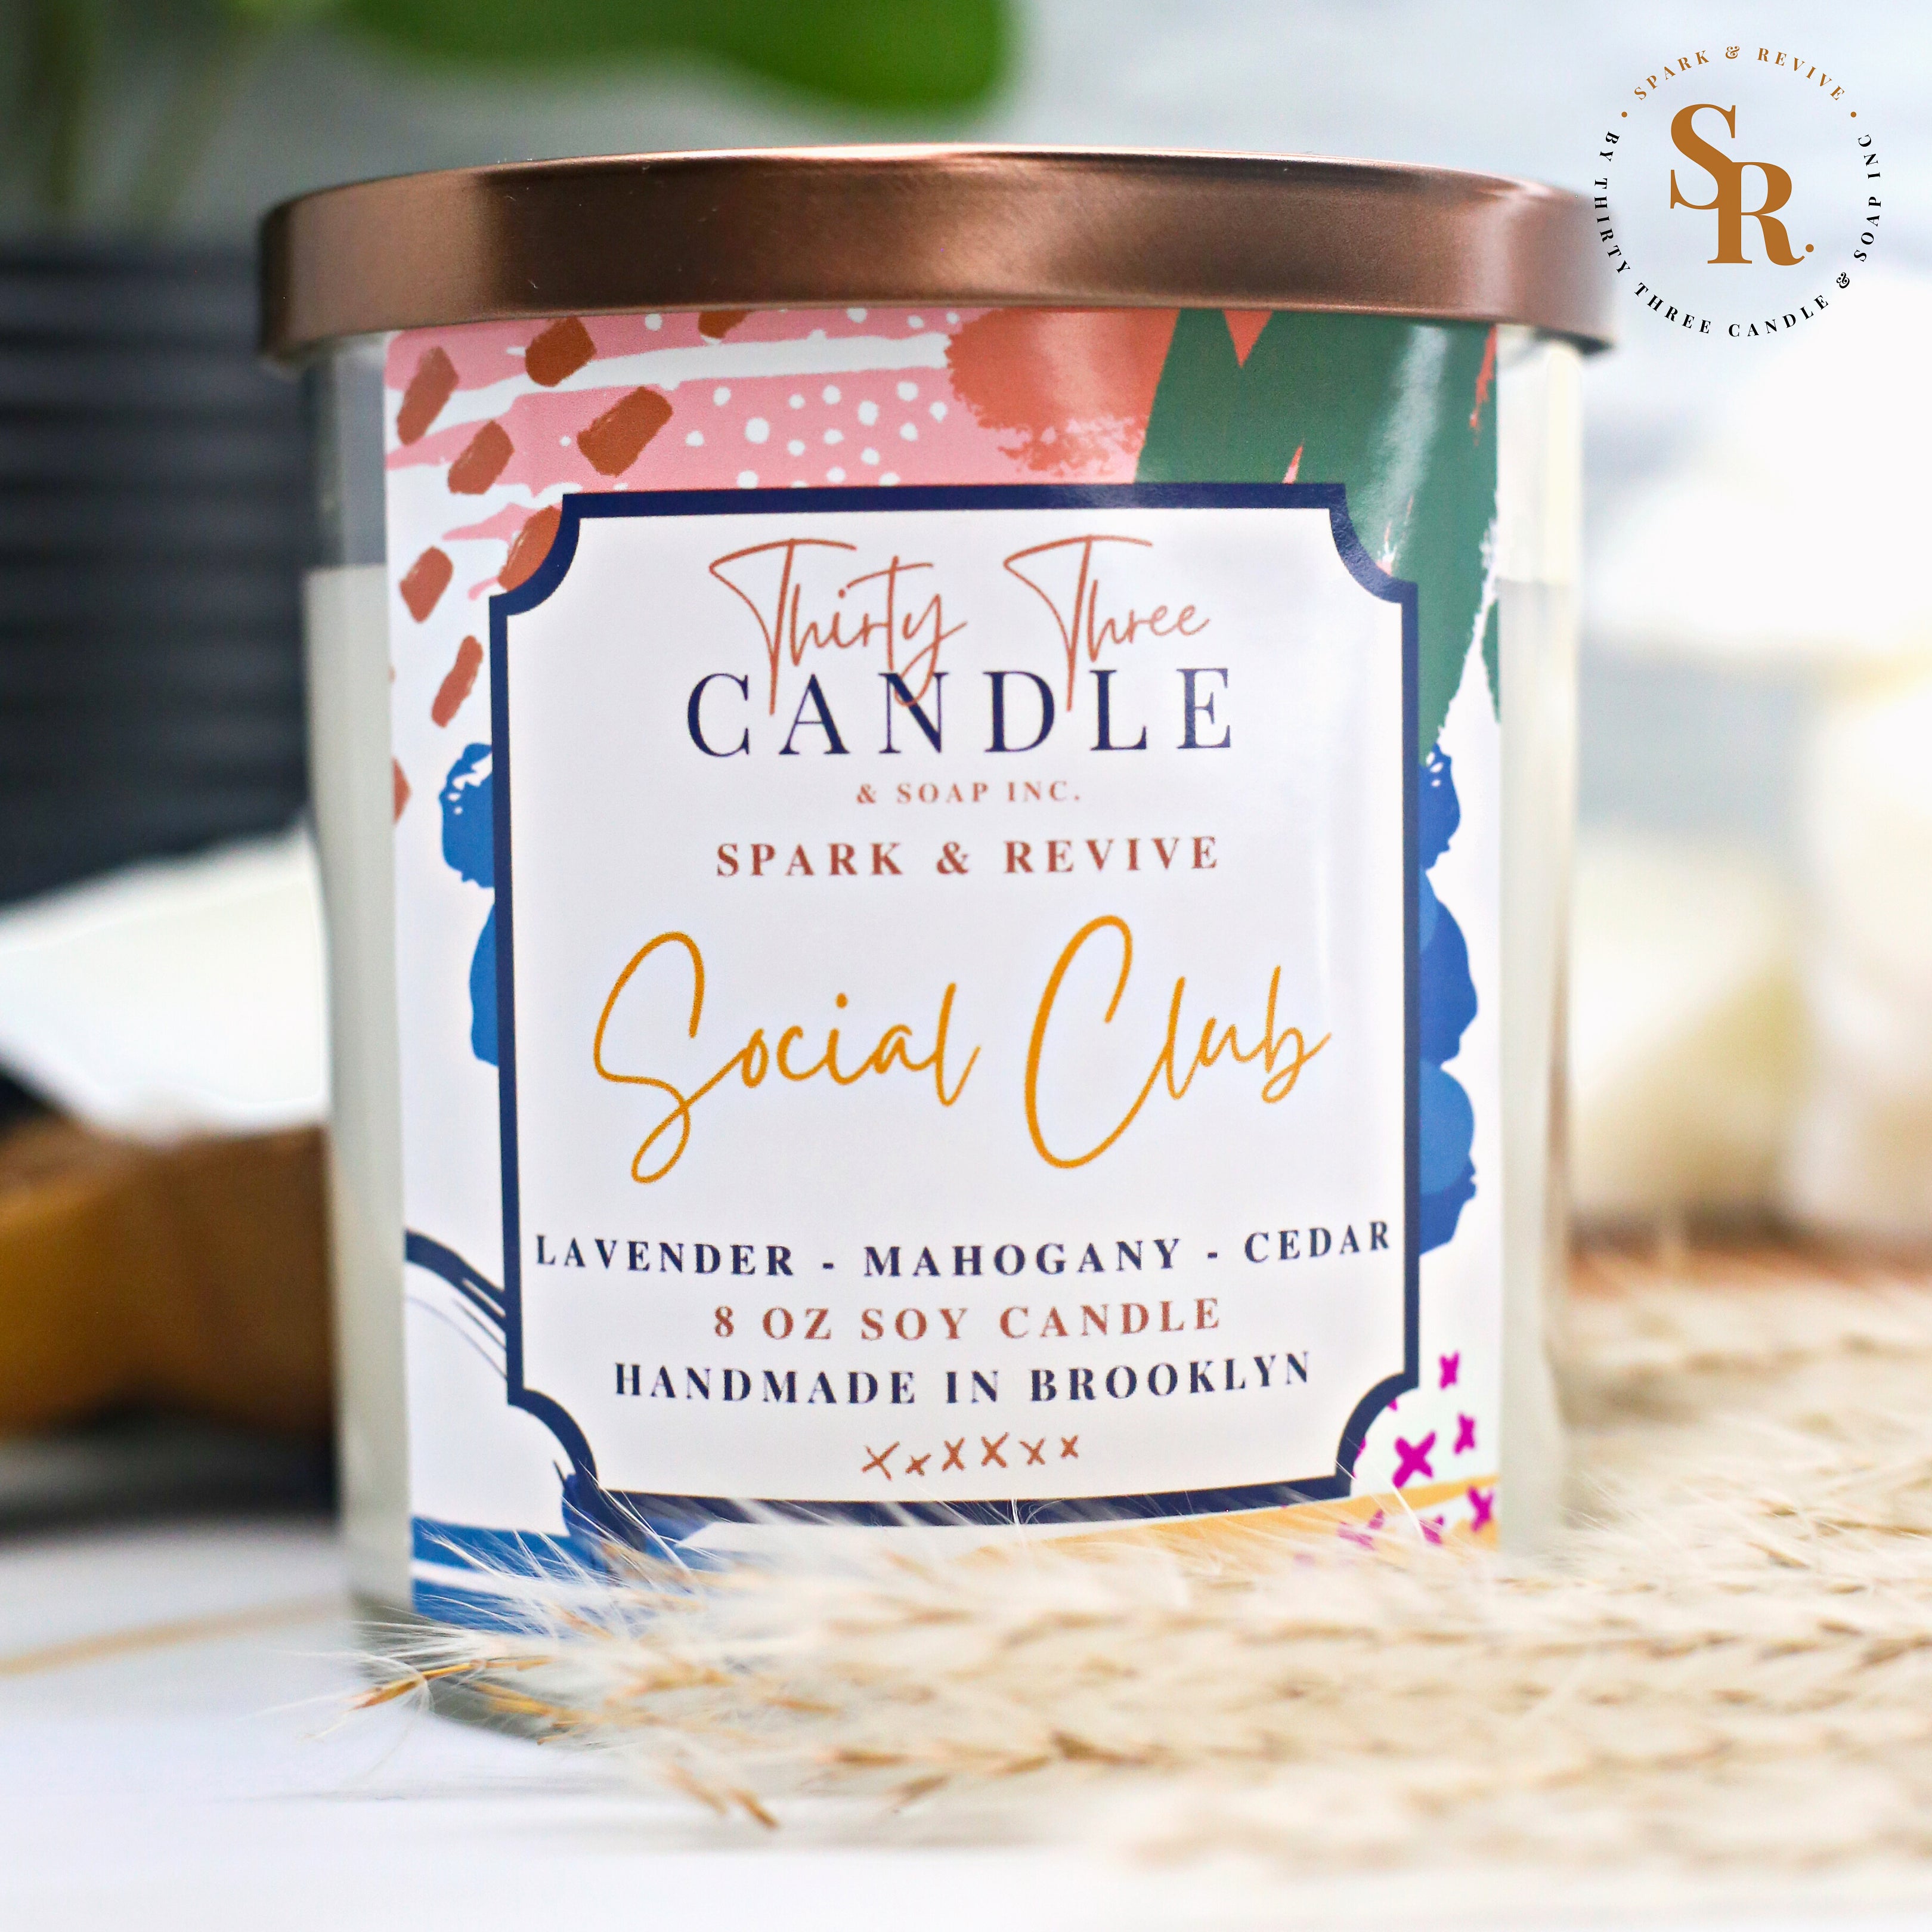 Curl up on the couch or sit in your favorite chair as you take in our Social Club scented soy candle, a rich, warm scent with some spice and comfort.  Cedar wood and oak wood intertwine with warm mahogany to create the perfect masculine scent for any season. Topped with hints of clean lavender, jasmine, lily, and the rosy nuances of geranium, Social Club has plenty of depth and strength.   Social Club is inviting and perfect for year round satisfaction. @SparkandRevive